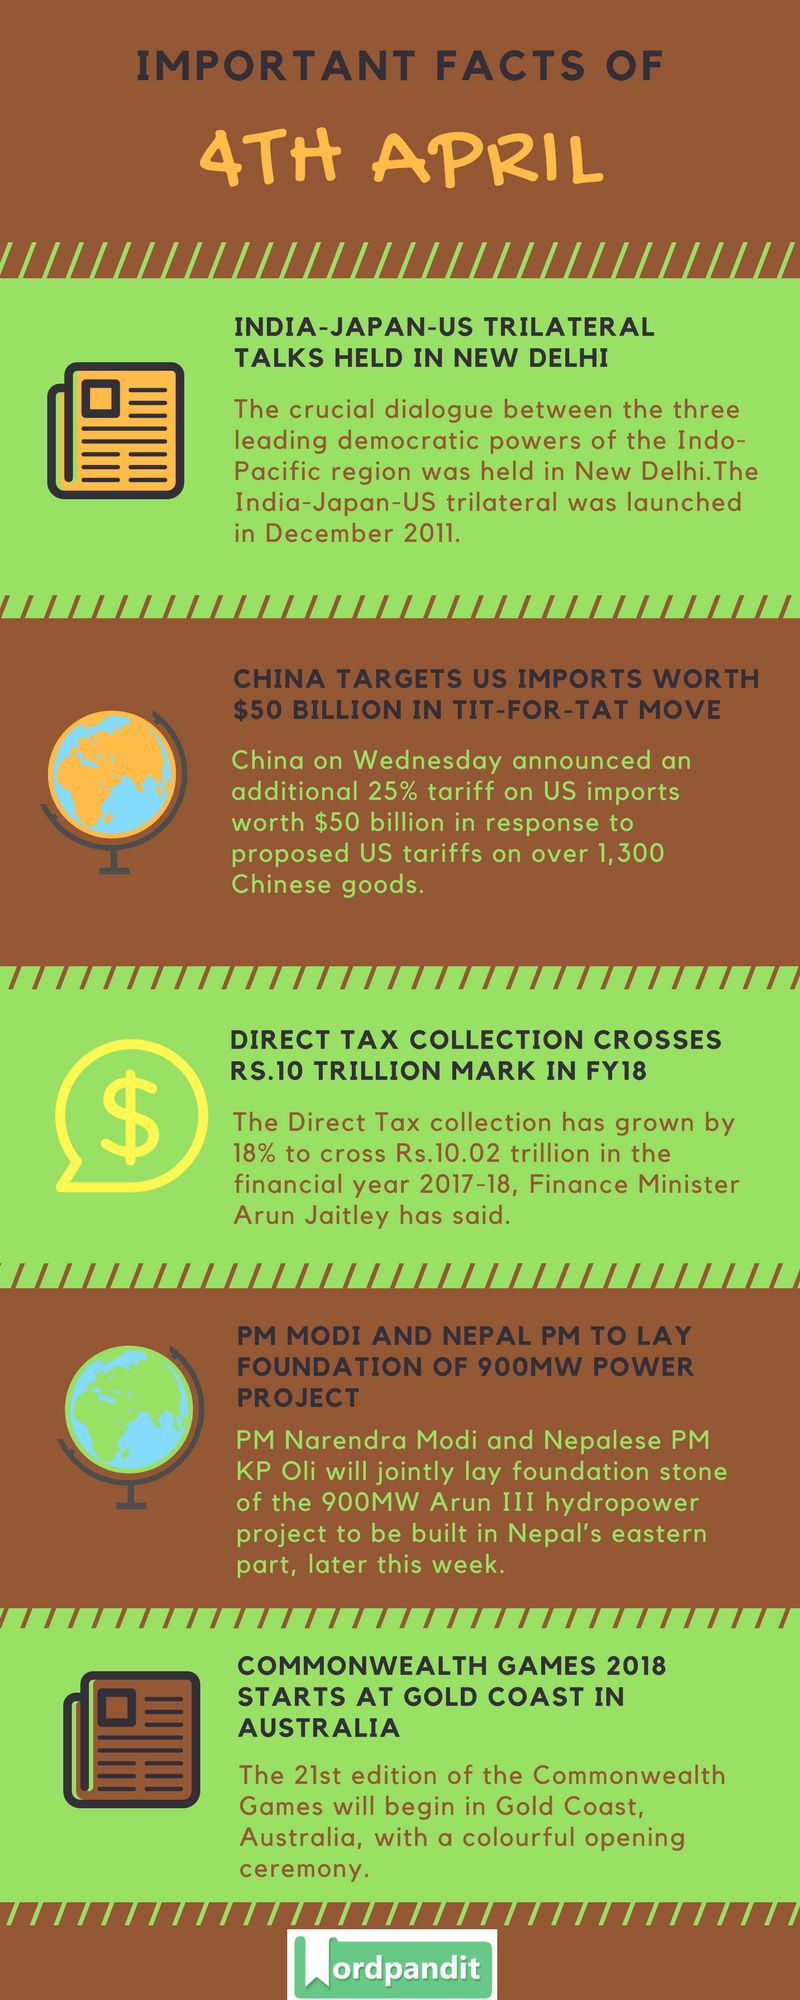 Daily Current Affairs 4 April 2018 Current Affairs Quiz April 4 2018 Current Affairs Infographic